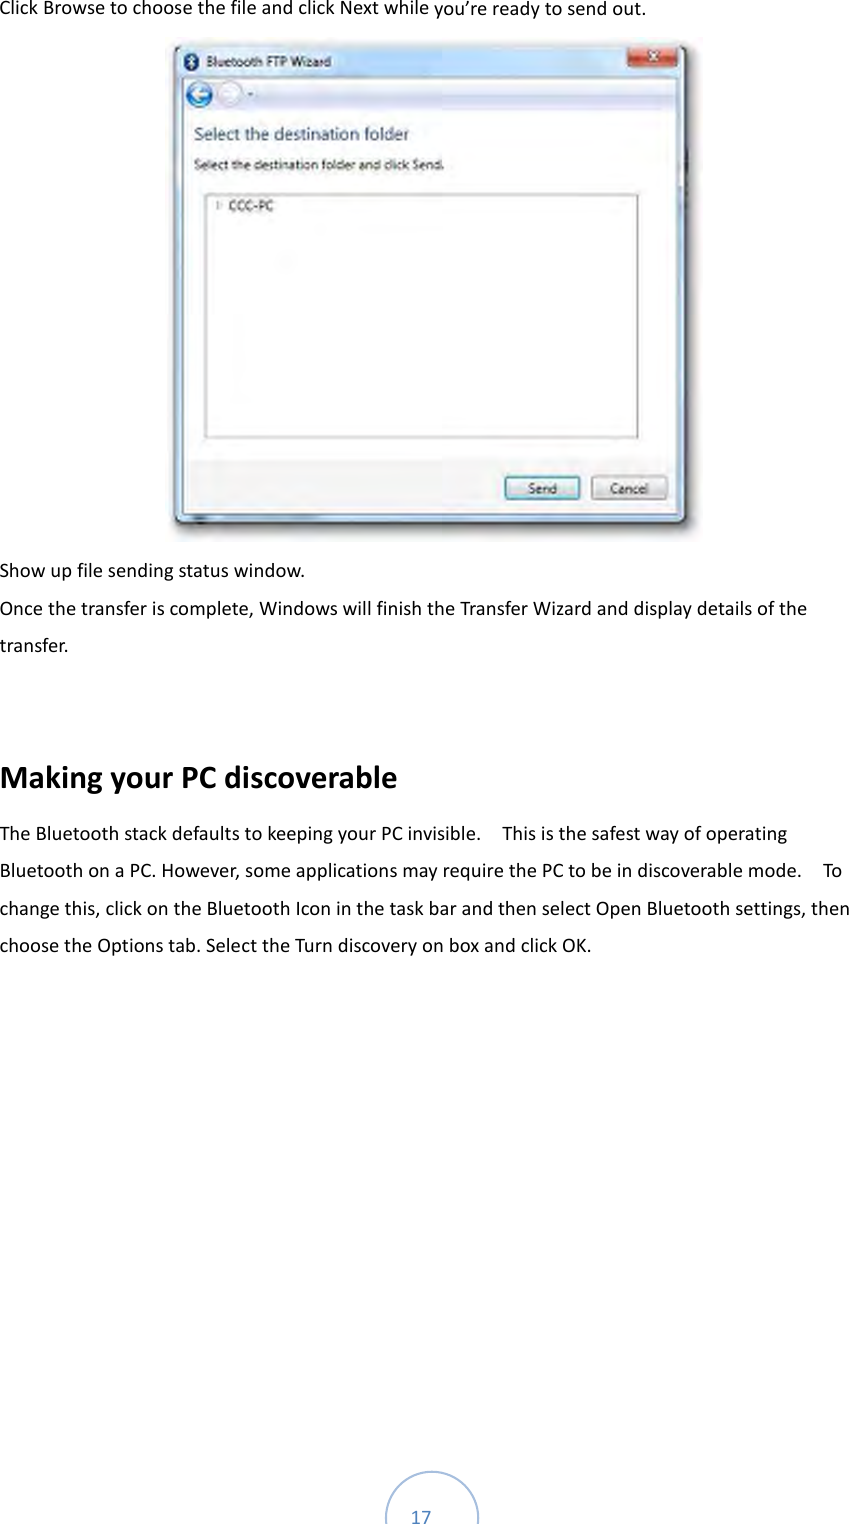  17 Click Browse to choose the file and click Next while you’re ready to send out.    Show up file sending status window.   Once the transfer is complete, Windows will finish the Transfer Wizard and display details of the transfer.  Making your PC discoverable       The Bluetooth stack defaults to keeping your PC invisible.    This is the safest way of operating Bluetooth on a PC. However, some applications may require the PC to be in discoverable mode.    To change this, click on the Bluetooth Icon in the task bar and then select Open Bluetooth settings, then choose the Options tab. Select the Turn discovery on box and click OK.   